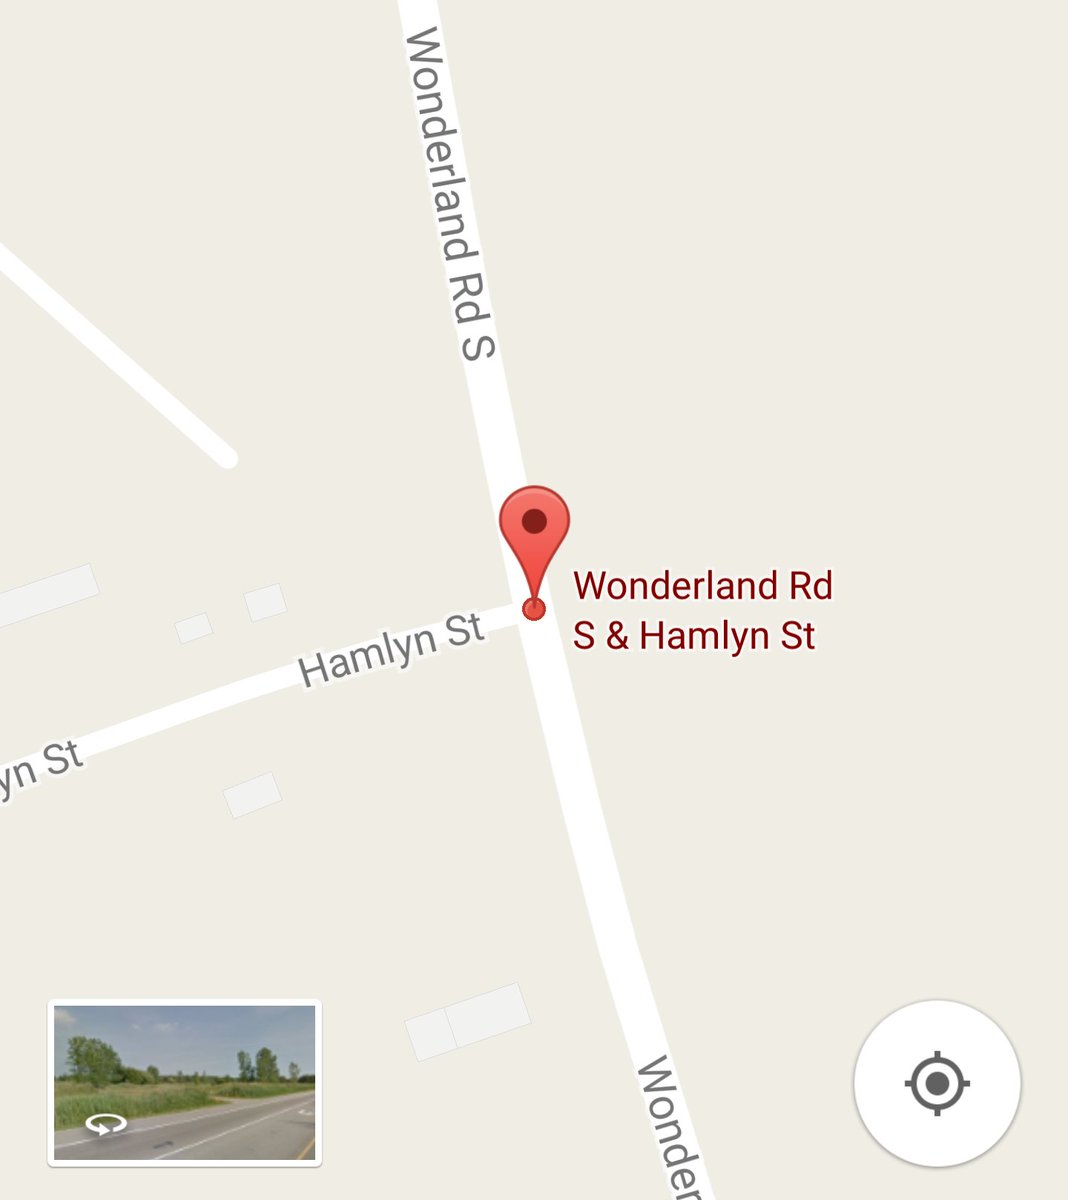 One person was treated by EMS and transported to hospital after a two-vehicle crash early Monday morning at Wonderland Rd. South and Hamlyn St.